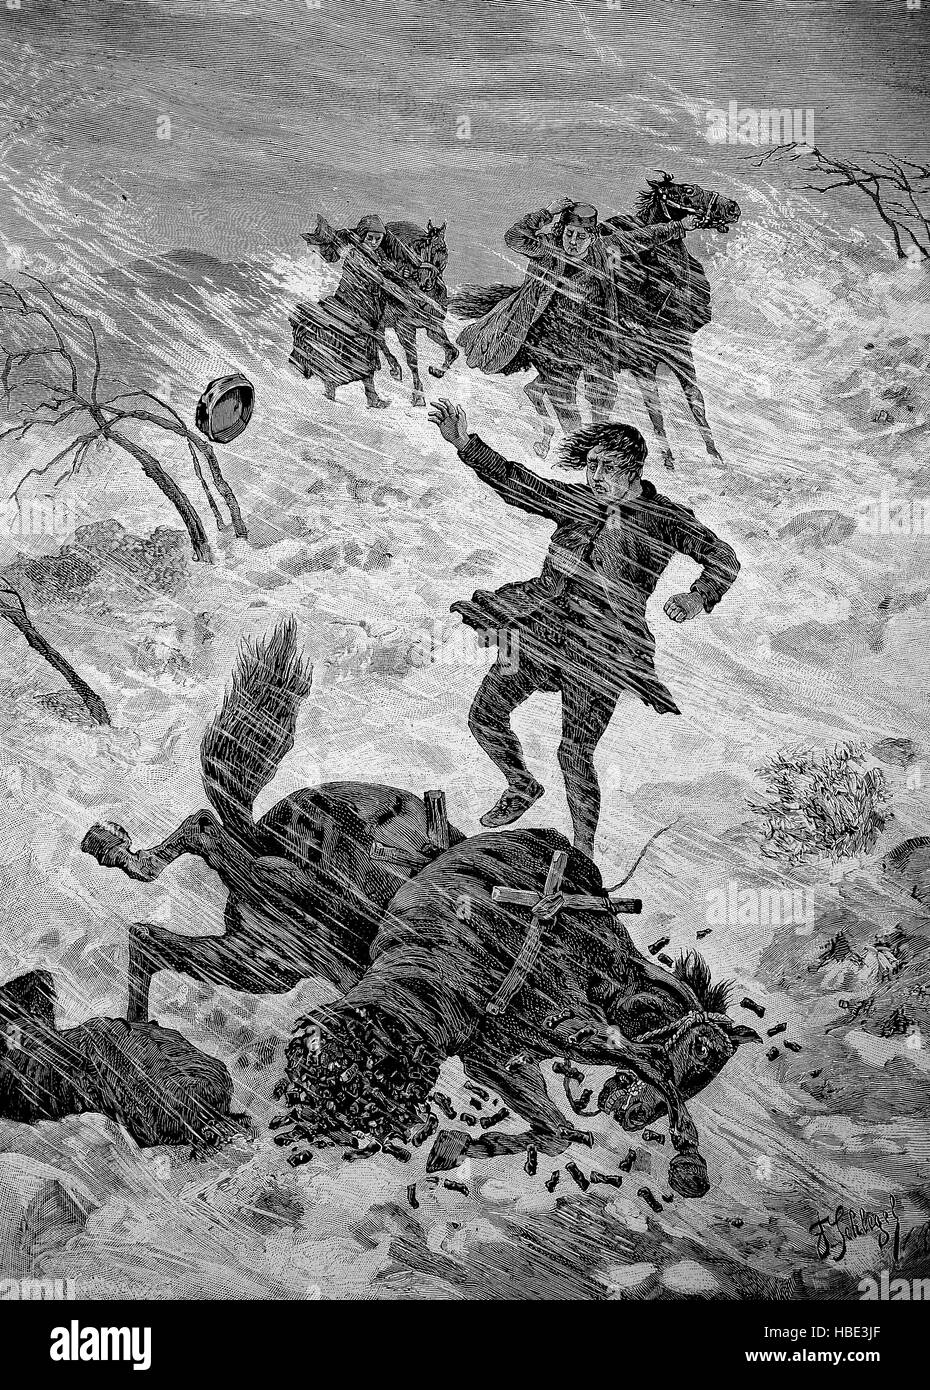 Coal merchants from Istria is caught in a storm, illustration, woodcut from 1880 Stock Photo